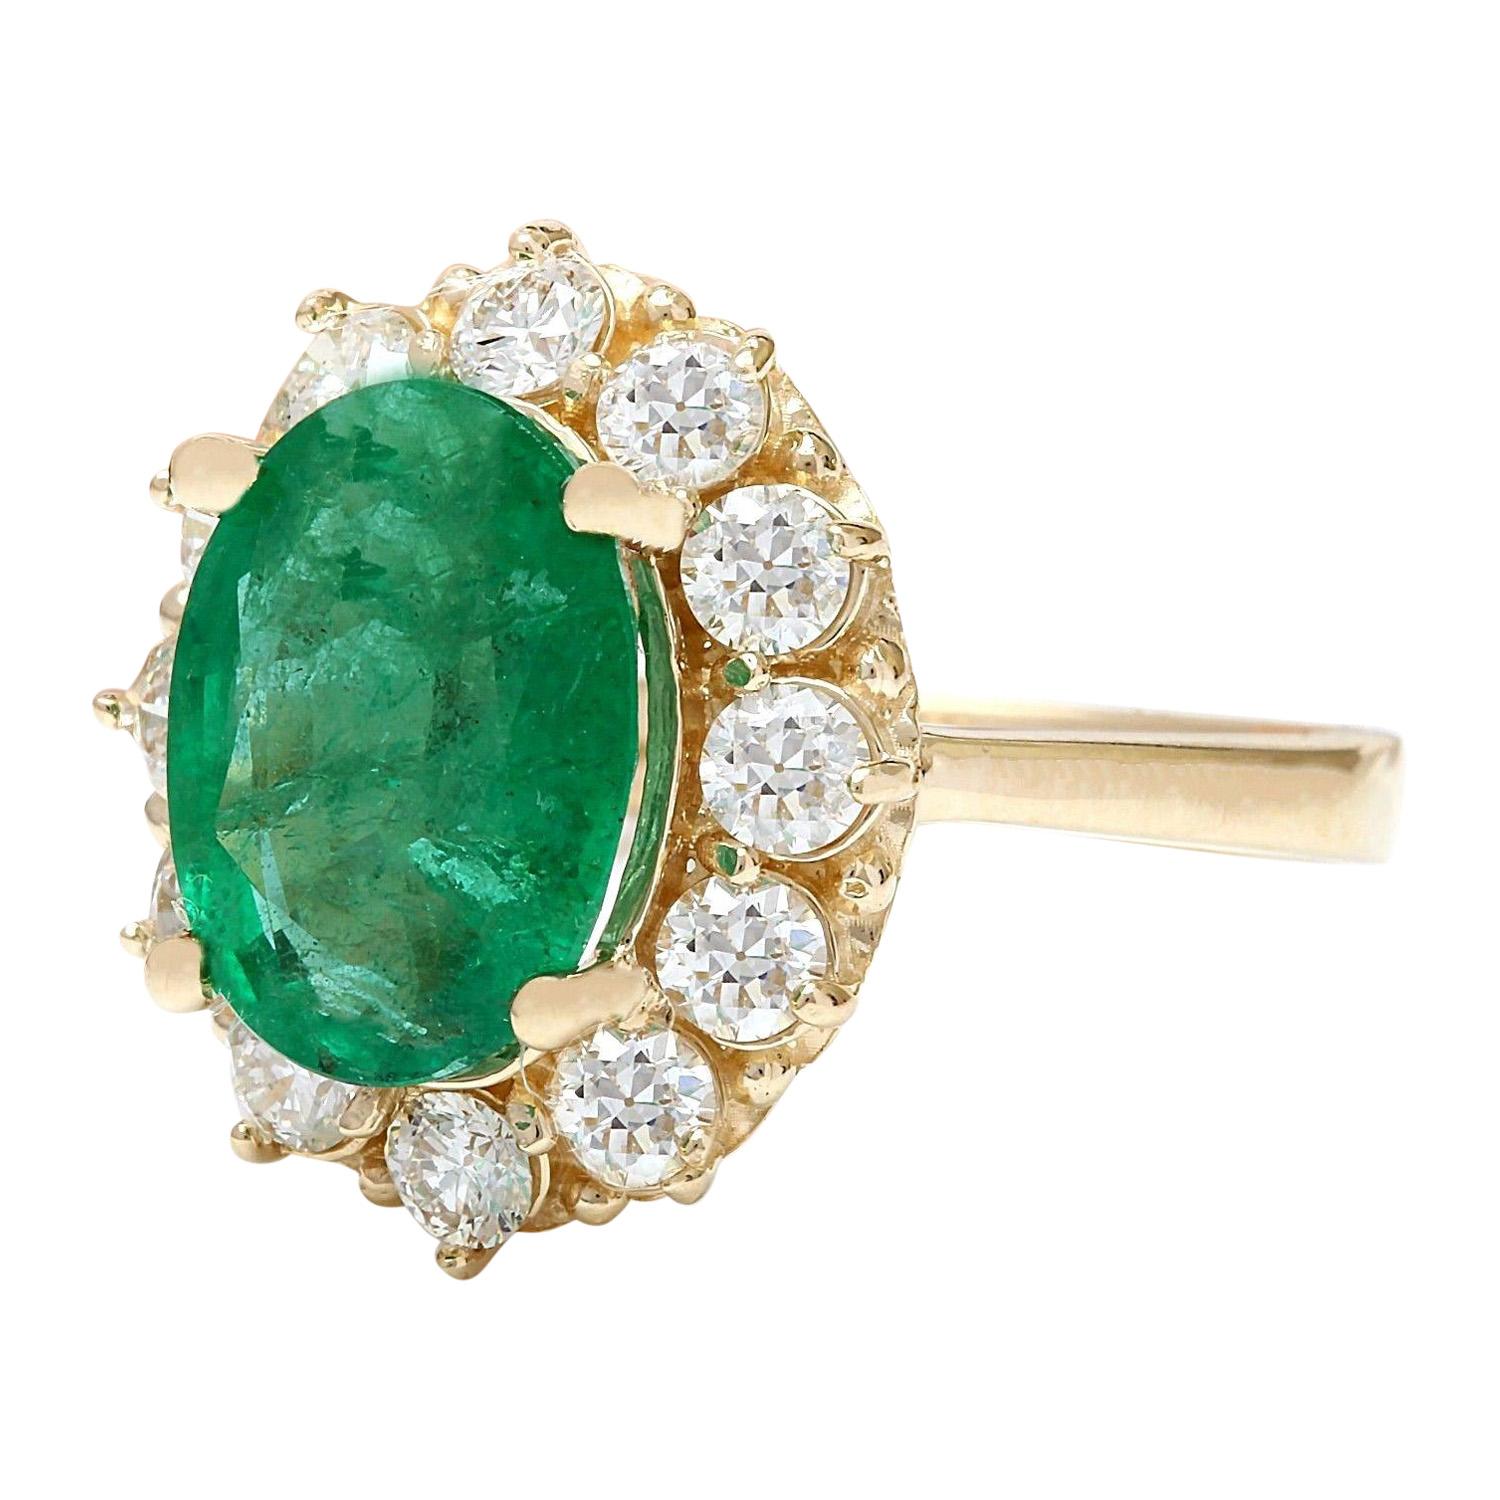 4.40 Carat Natural Emerald 14K Solid Yellow Gold Diamond Ring
 Item Type: Ring
 Item Style: Engagement
 Material: 14K Yellow Gold
 Mainstone: Emerald
 Stone Color: Green
 Stone Weight: 3.40 Carat
 Stone Shape: Oval
 Stone Quantity: 1
 Stone